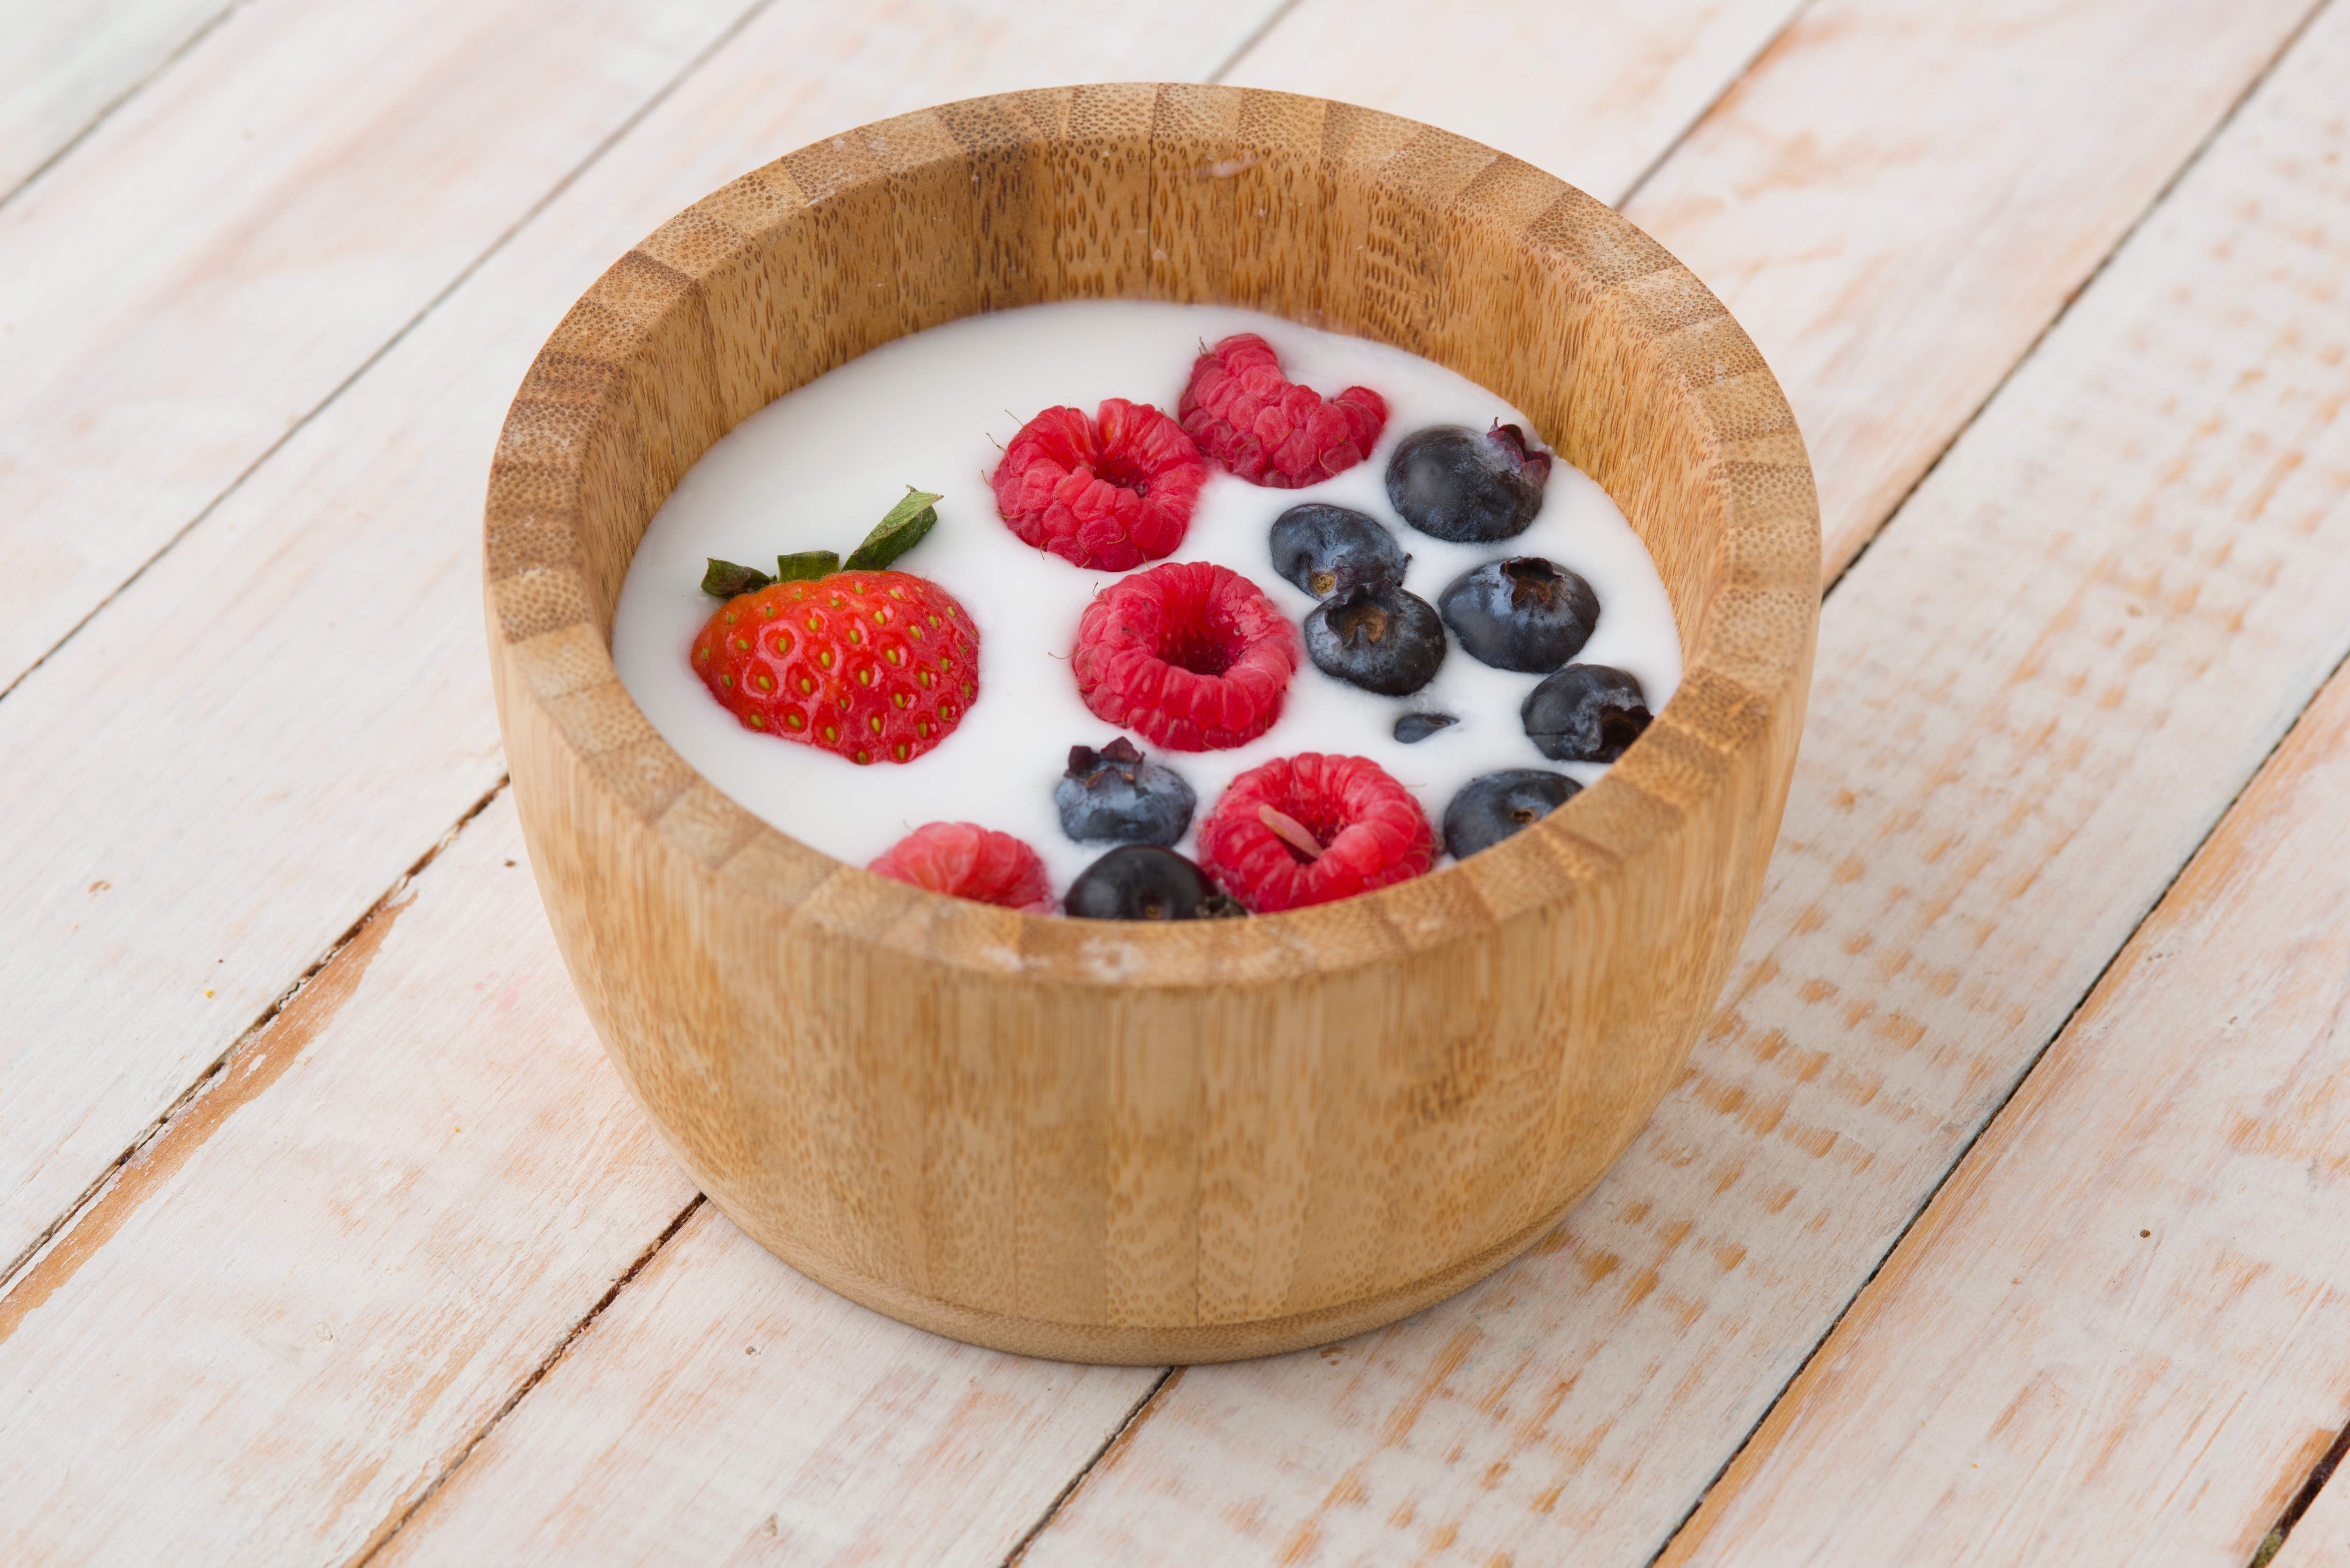 Vegan yogurth with berries on a rustic wooden bowl